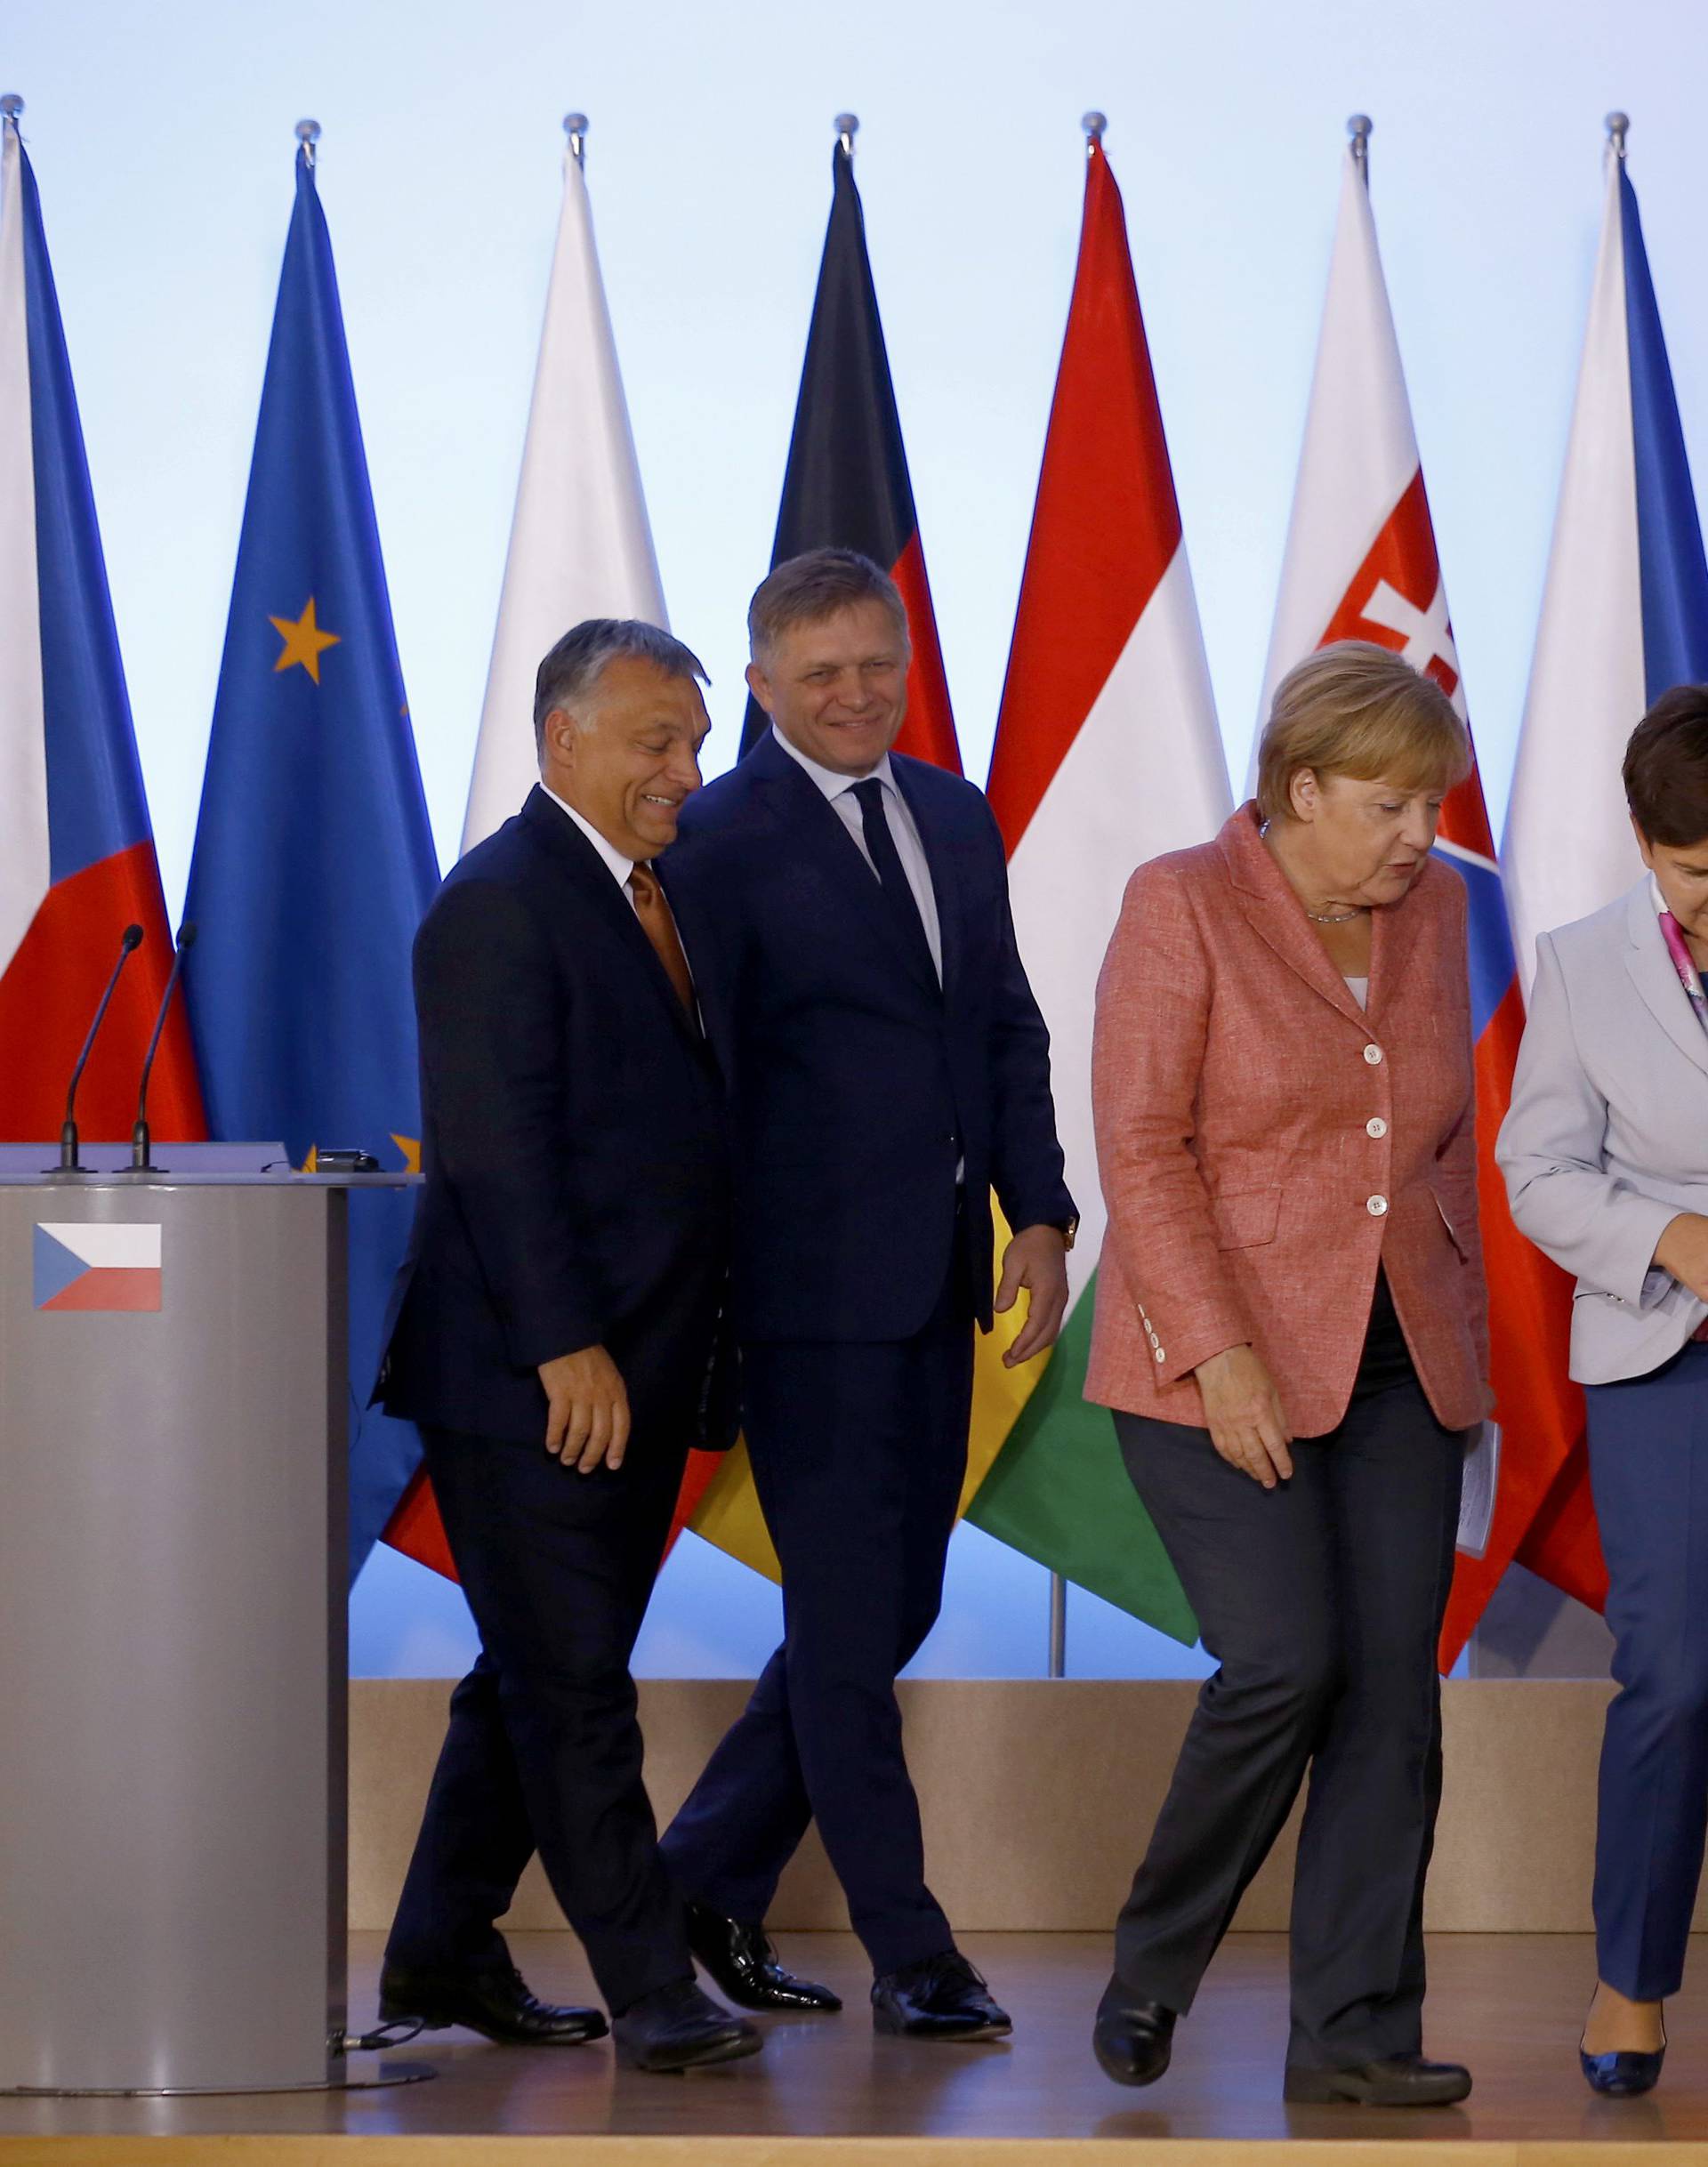 Slovakia's PM Fico, German Chancellor Merkel, Poland's PM Szydlo, Hungary's PM Orban and Czech Republic's PM Sobotka leave news conference in Warsaw